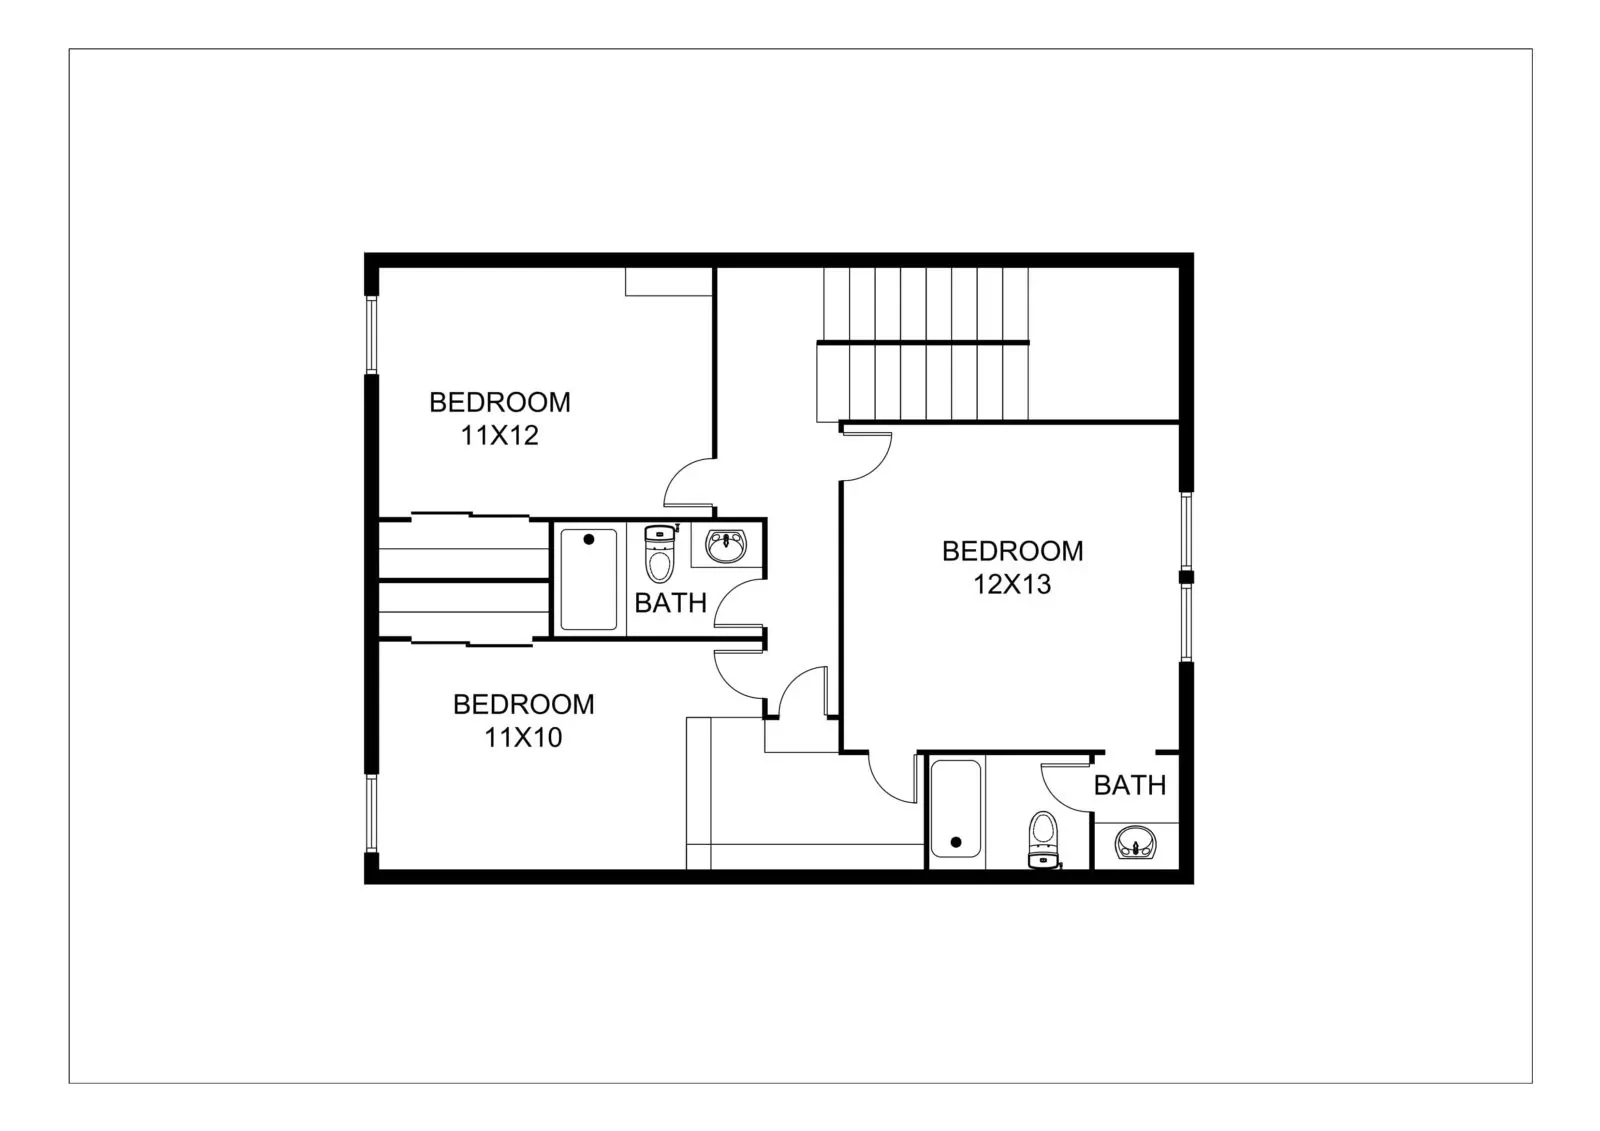 House Plans Drawing at Rs 10/sq ft in Bhopal | ID: 2849622784373